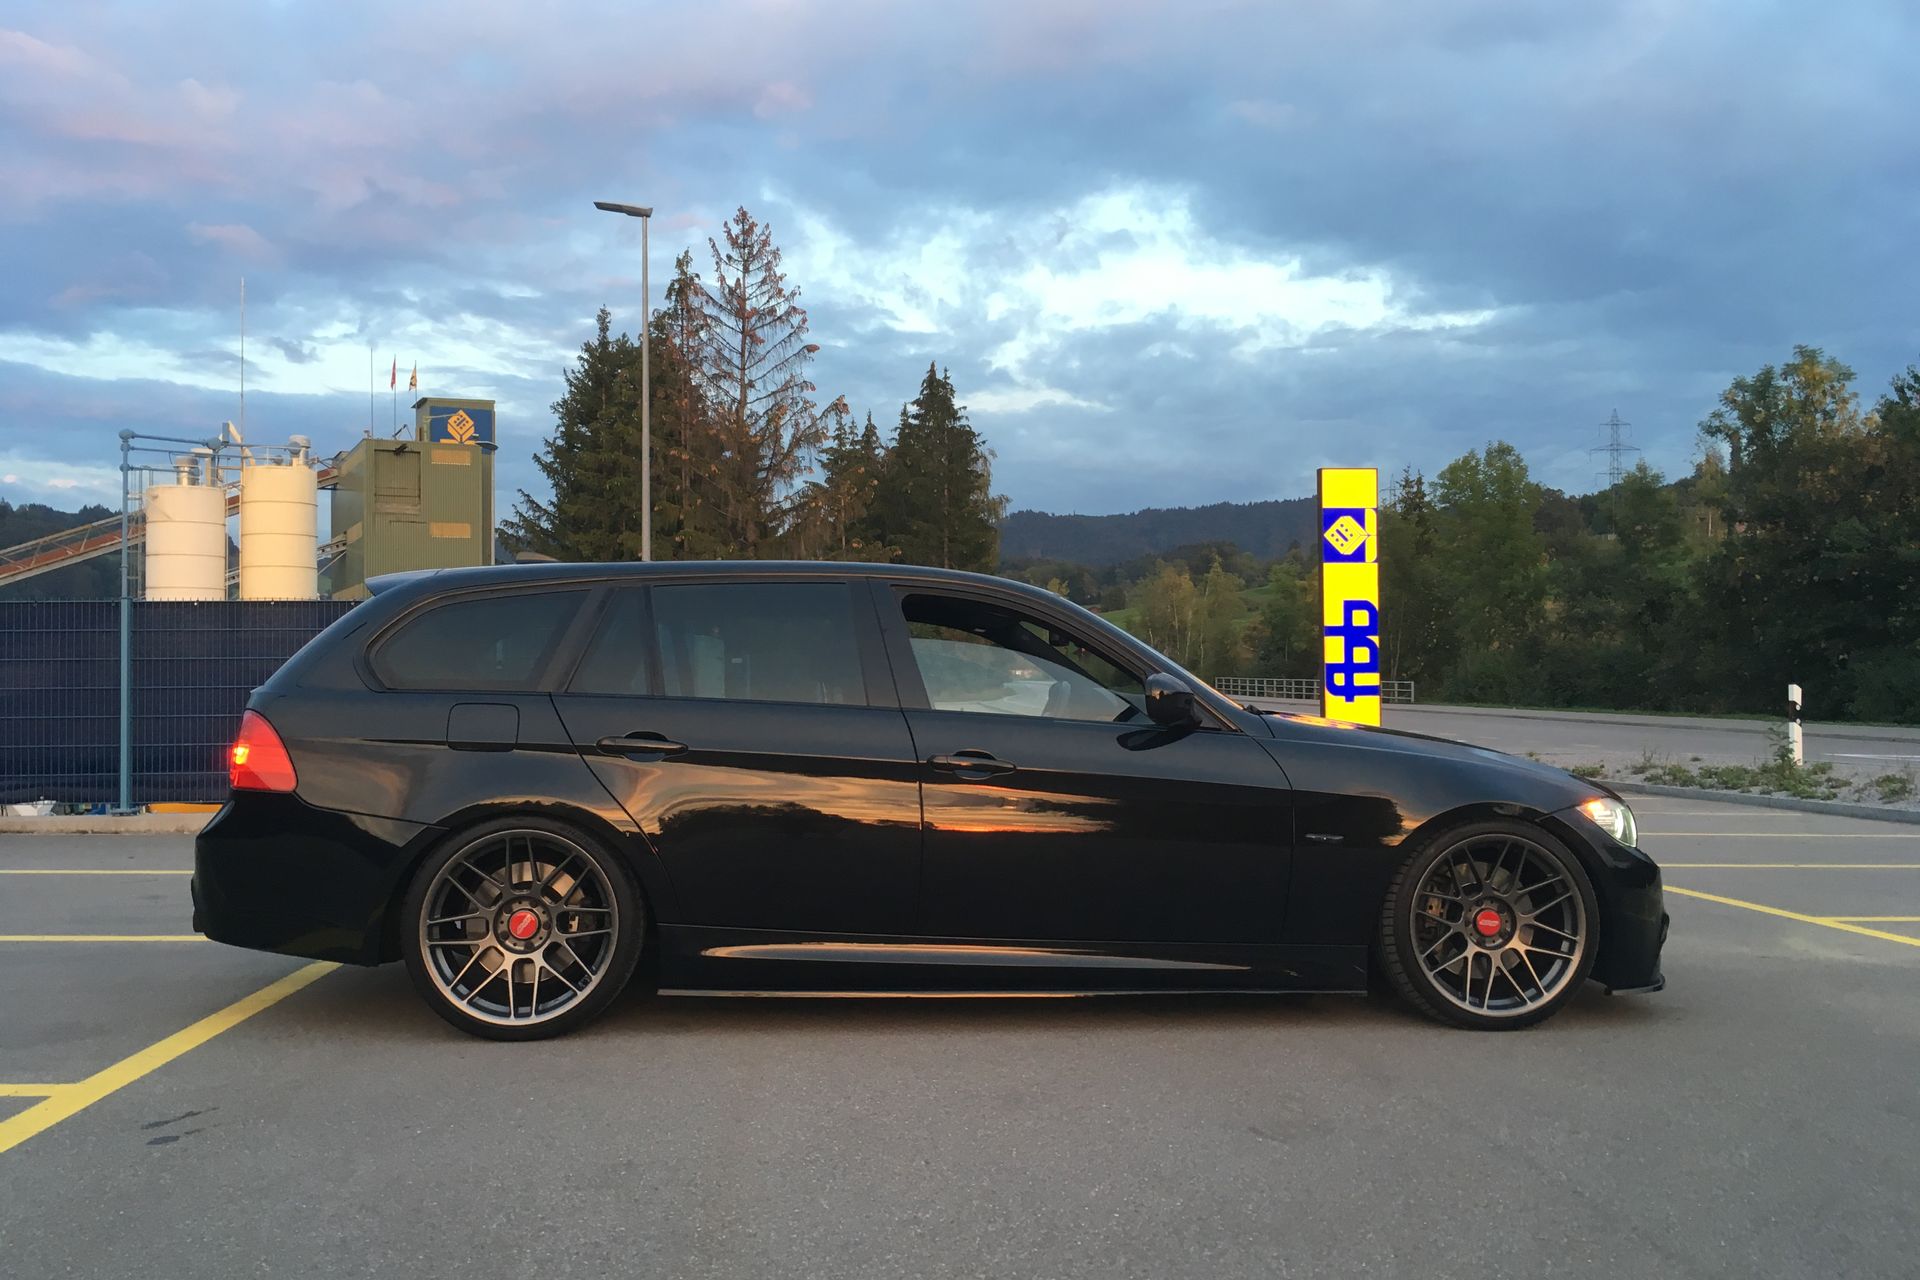 BMW E91 LCI Wagon 3 Series with 19 ARC-8 in Anthracite on BMW E90